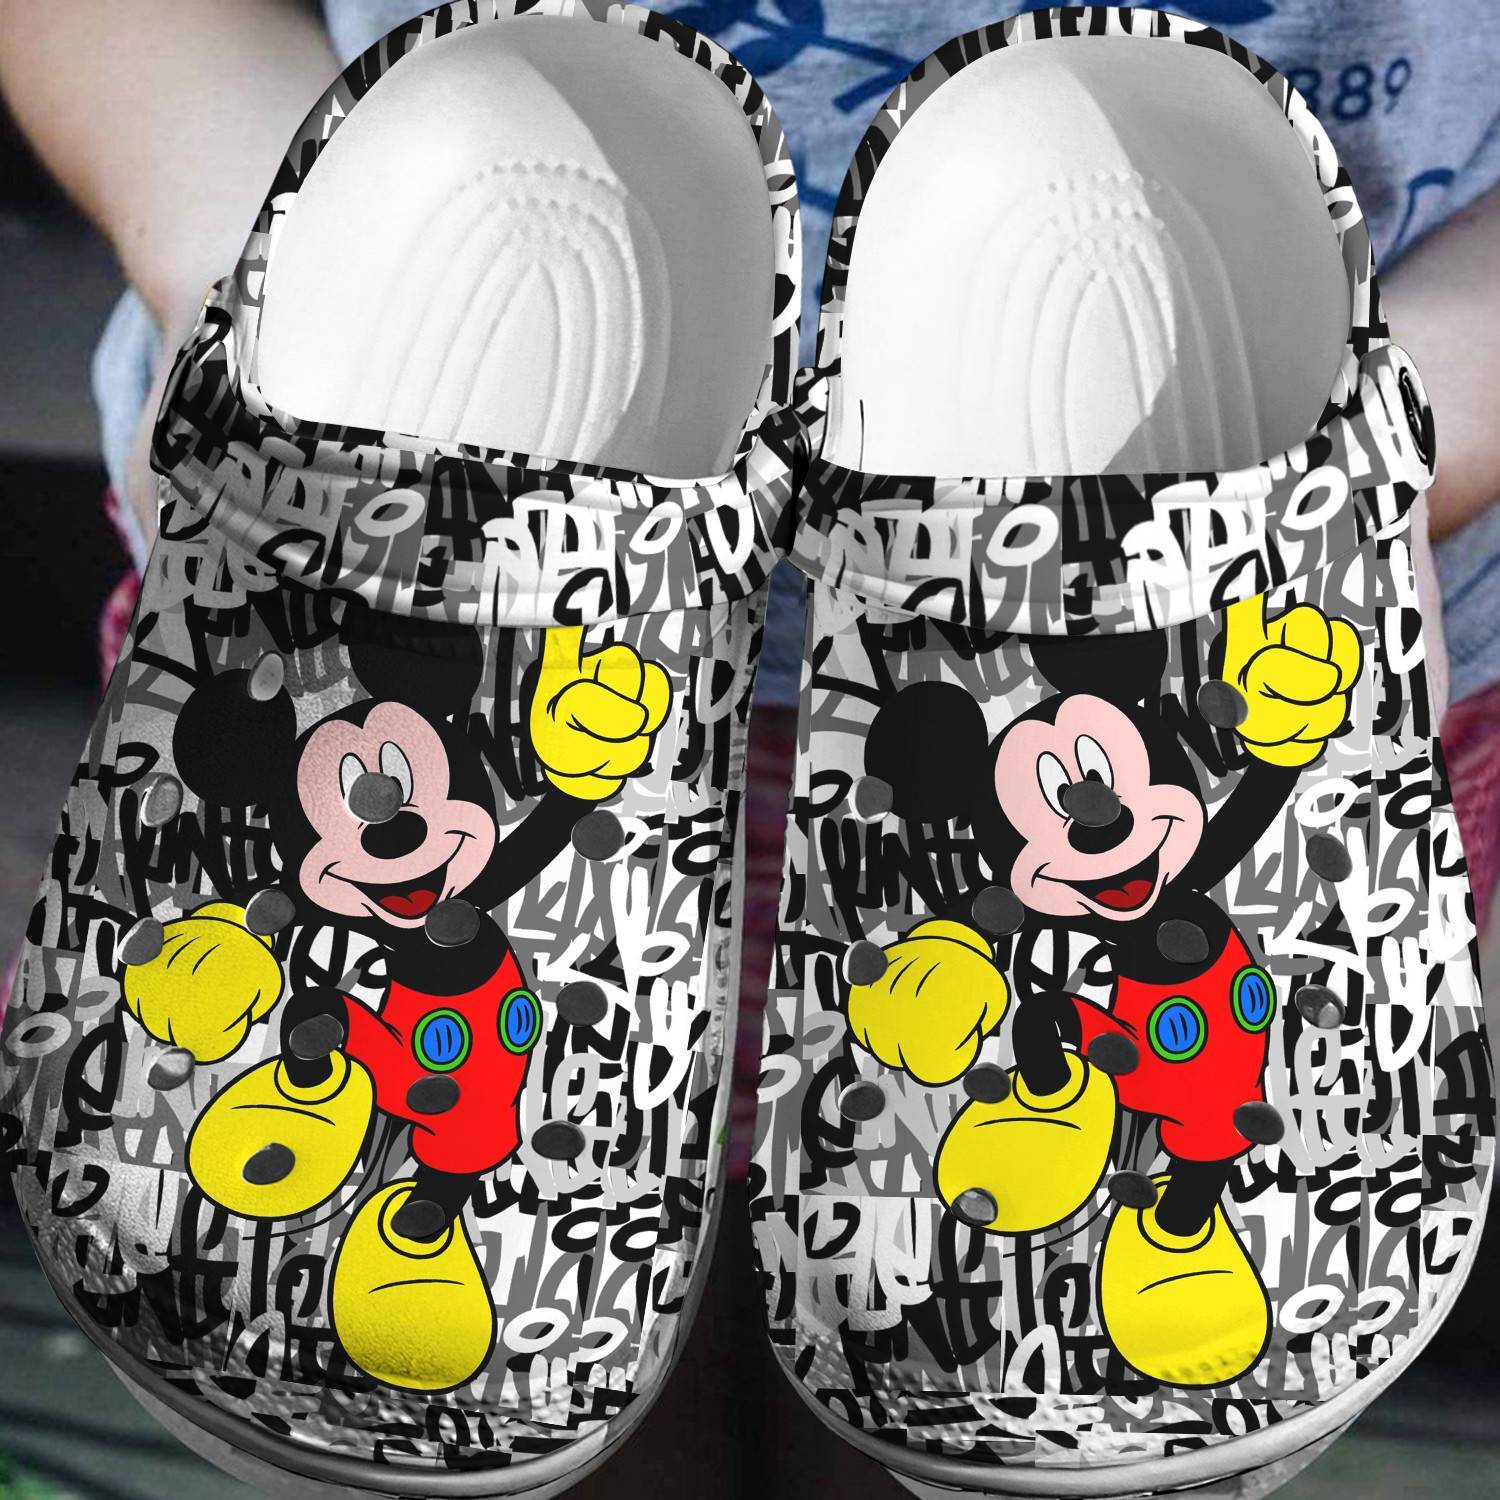 Iconic Style: Mickey Mouse Crocs Classic Clogs